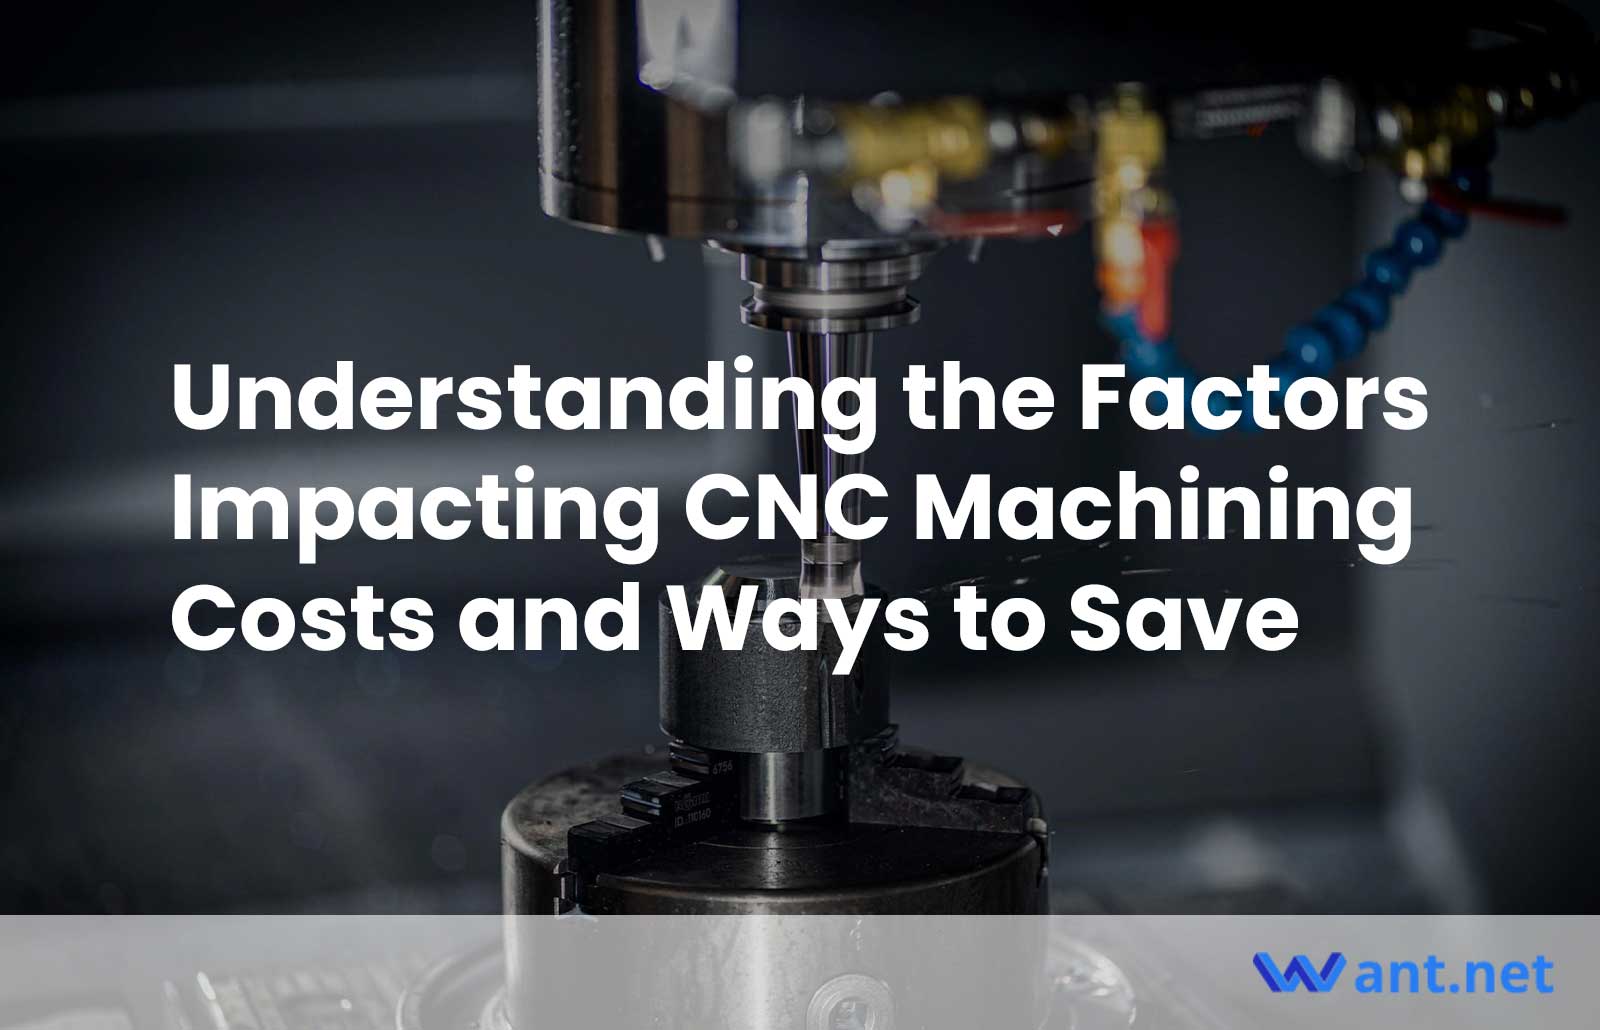 Understanding the Factors Impacting CNC Machining Costs and Ways to Save